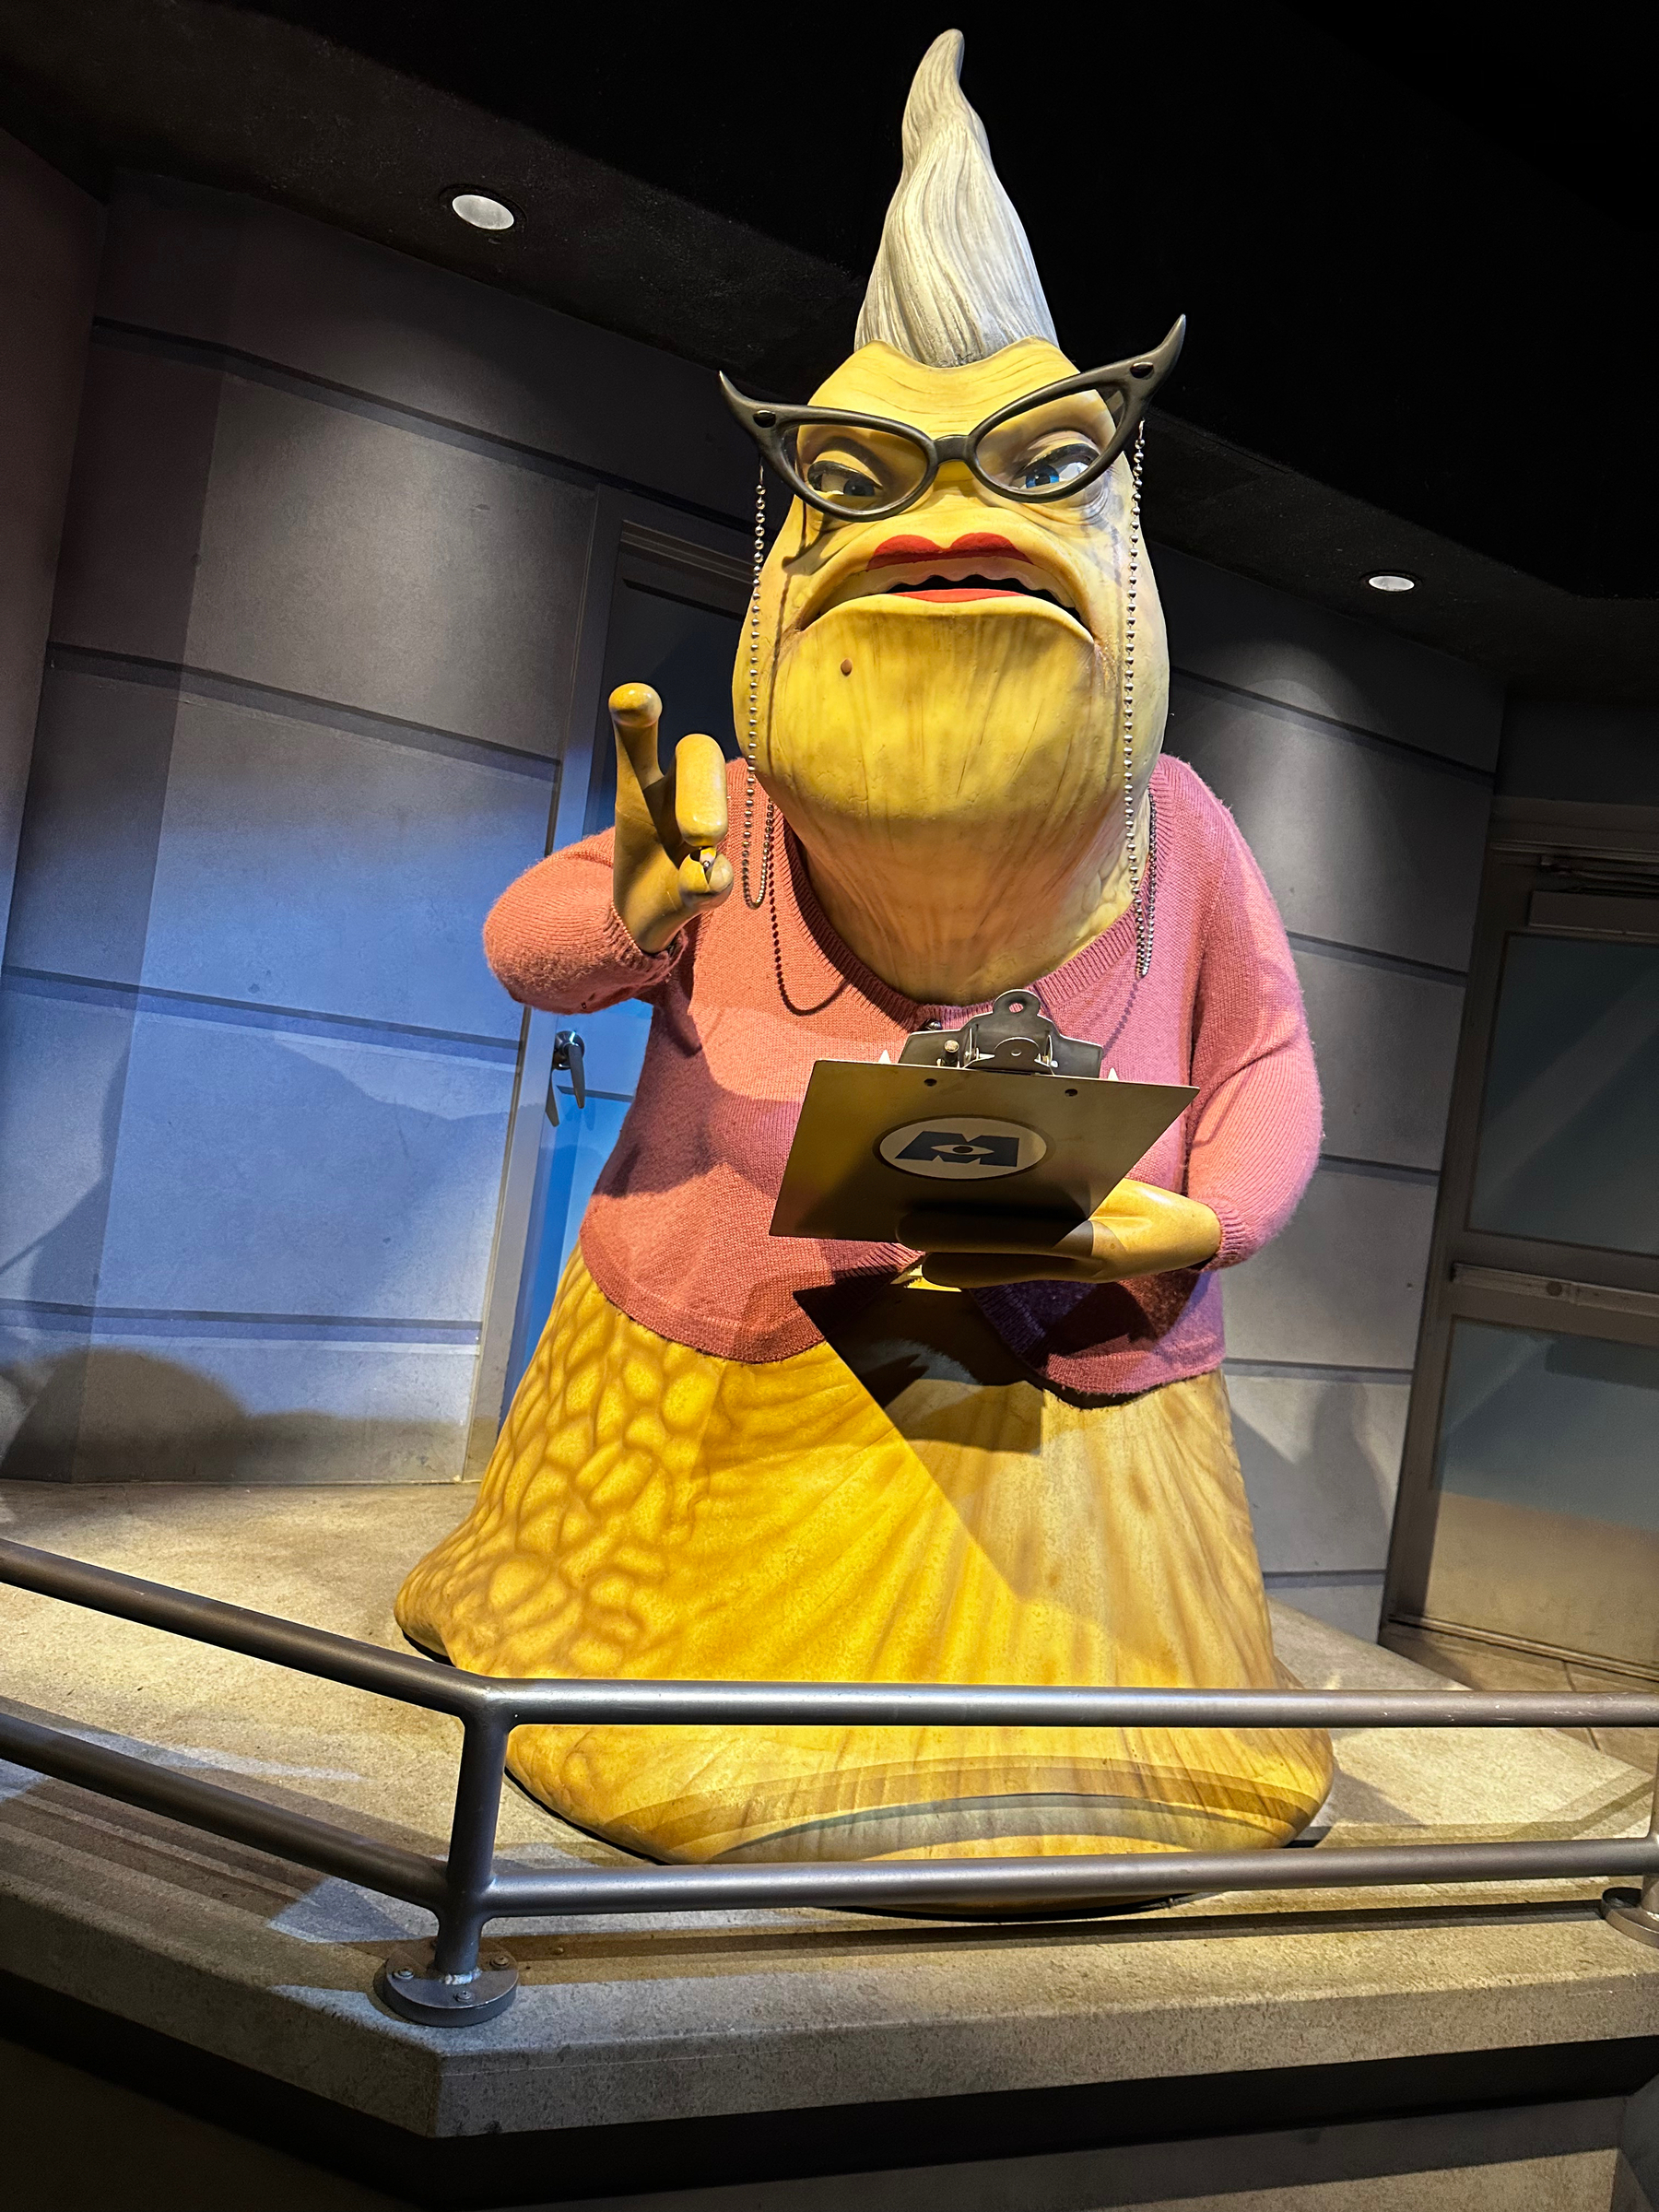 Roz from Monsters Inc., at the end of the Disney California Adventure ride for the same franchise.